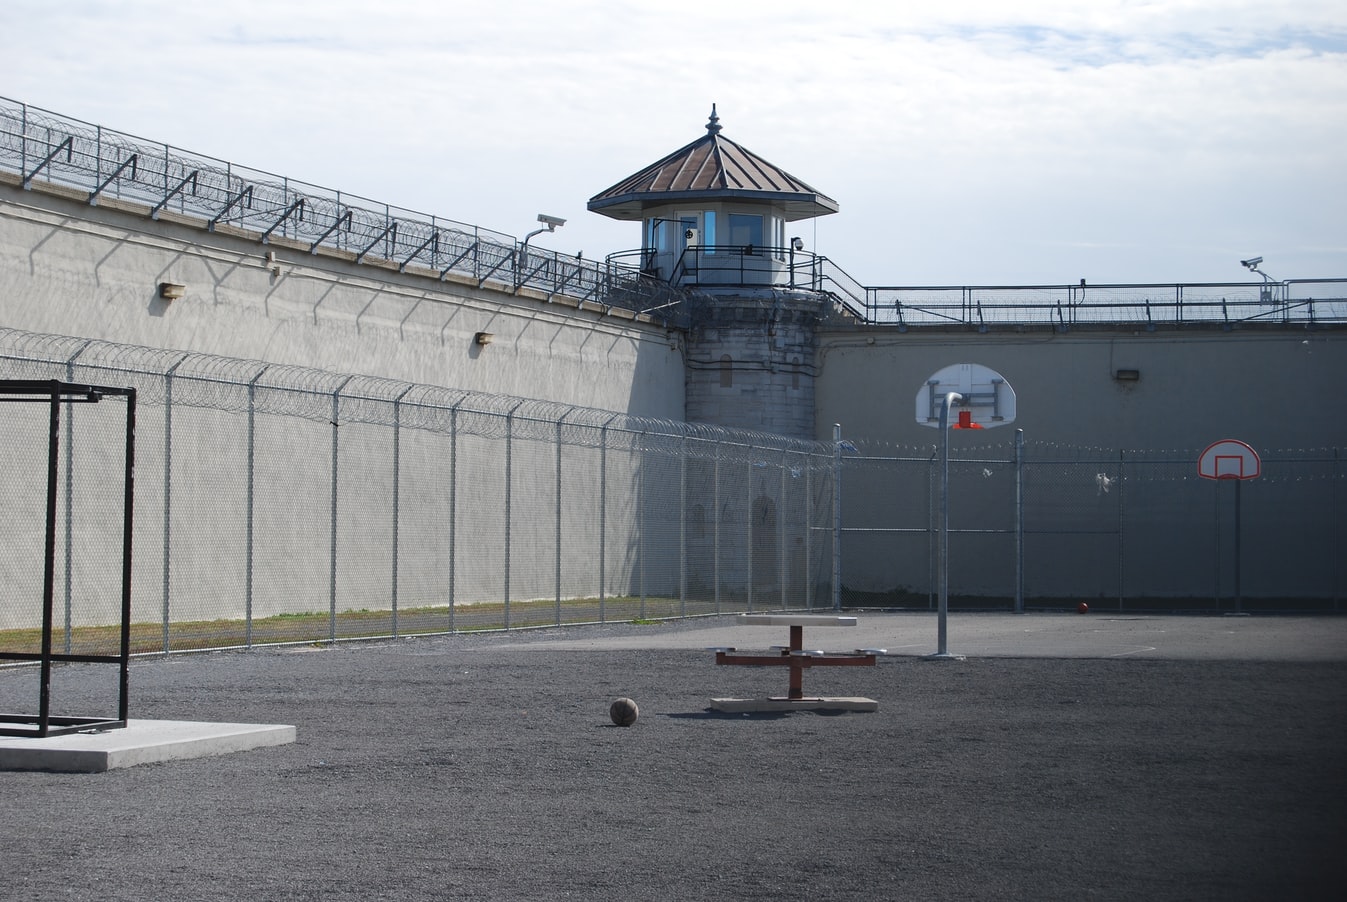 Outside of a Federal Prison